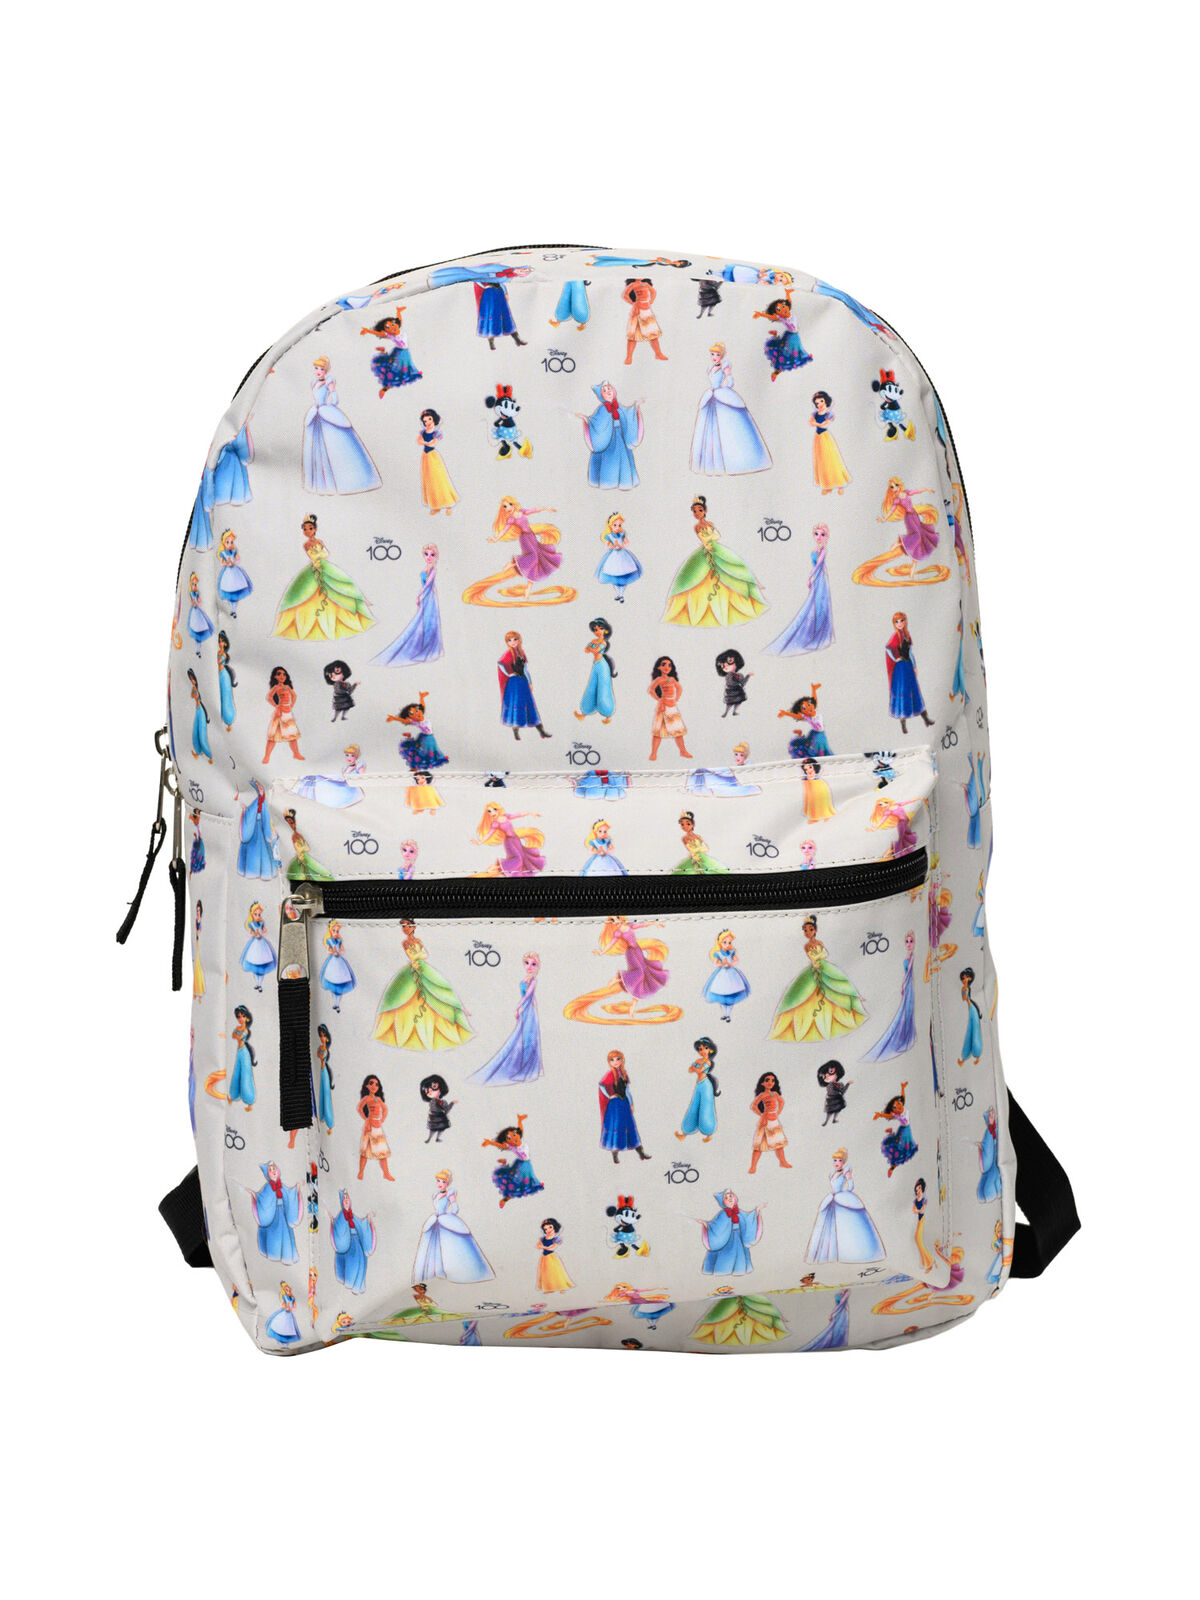 Disney Princesses All-Character Laptop Backpack Deluxe 16\